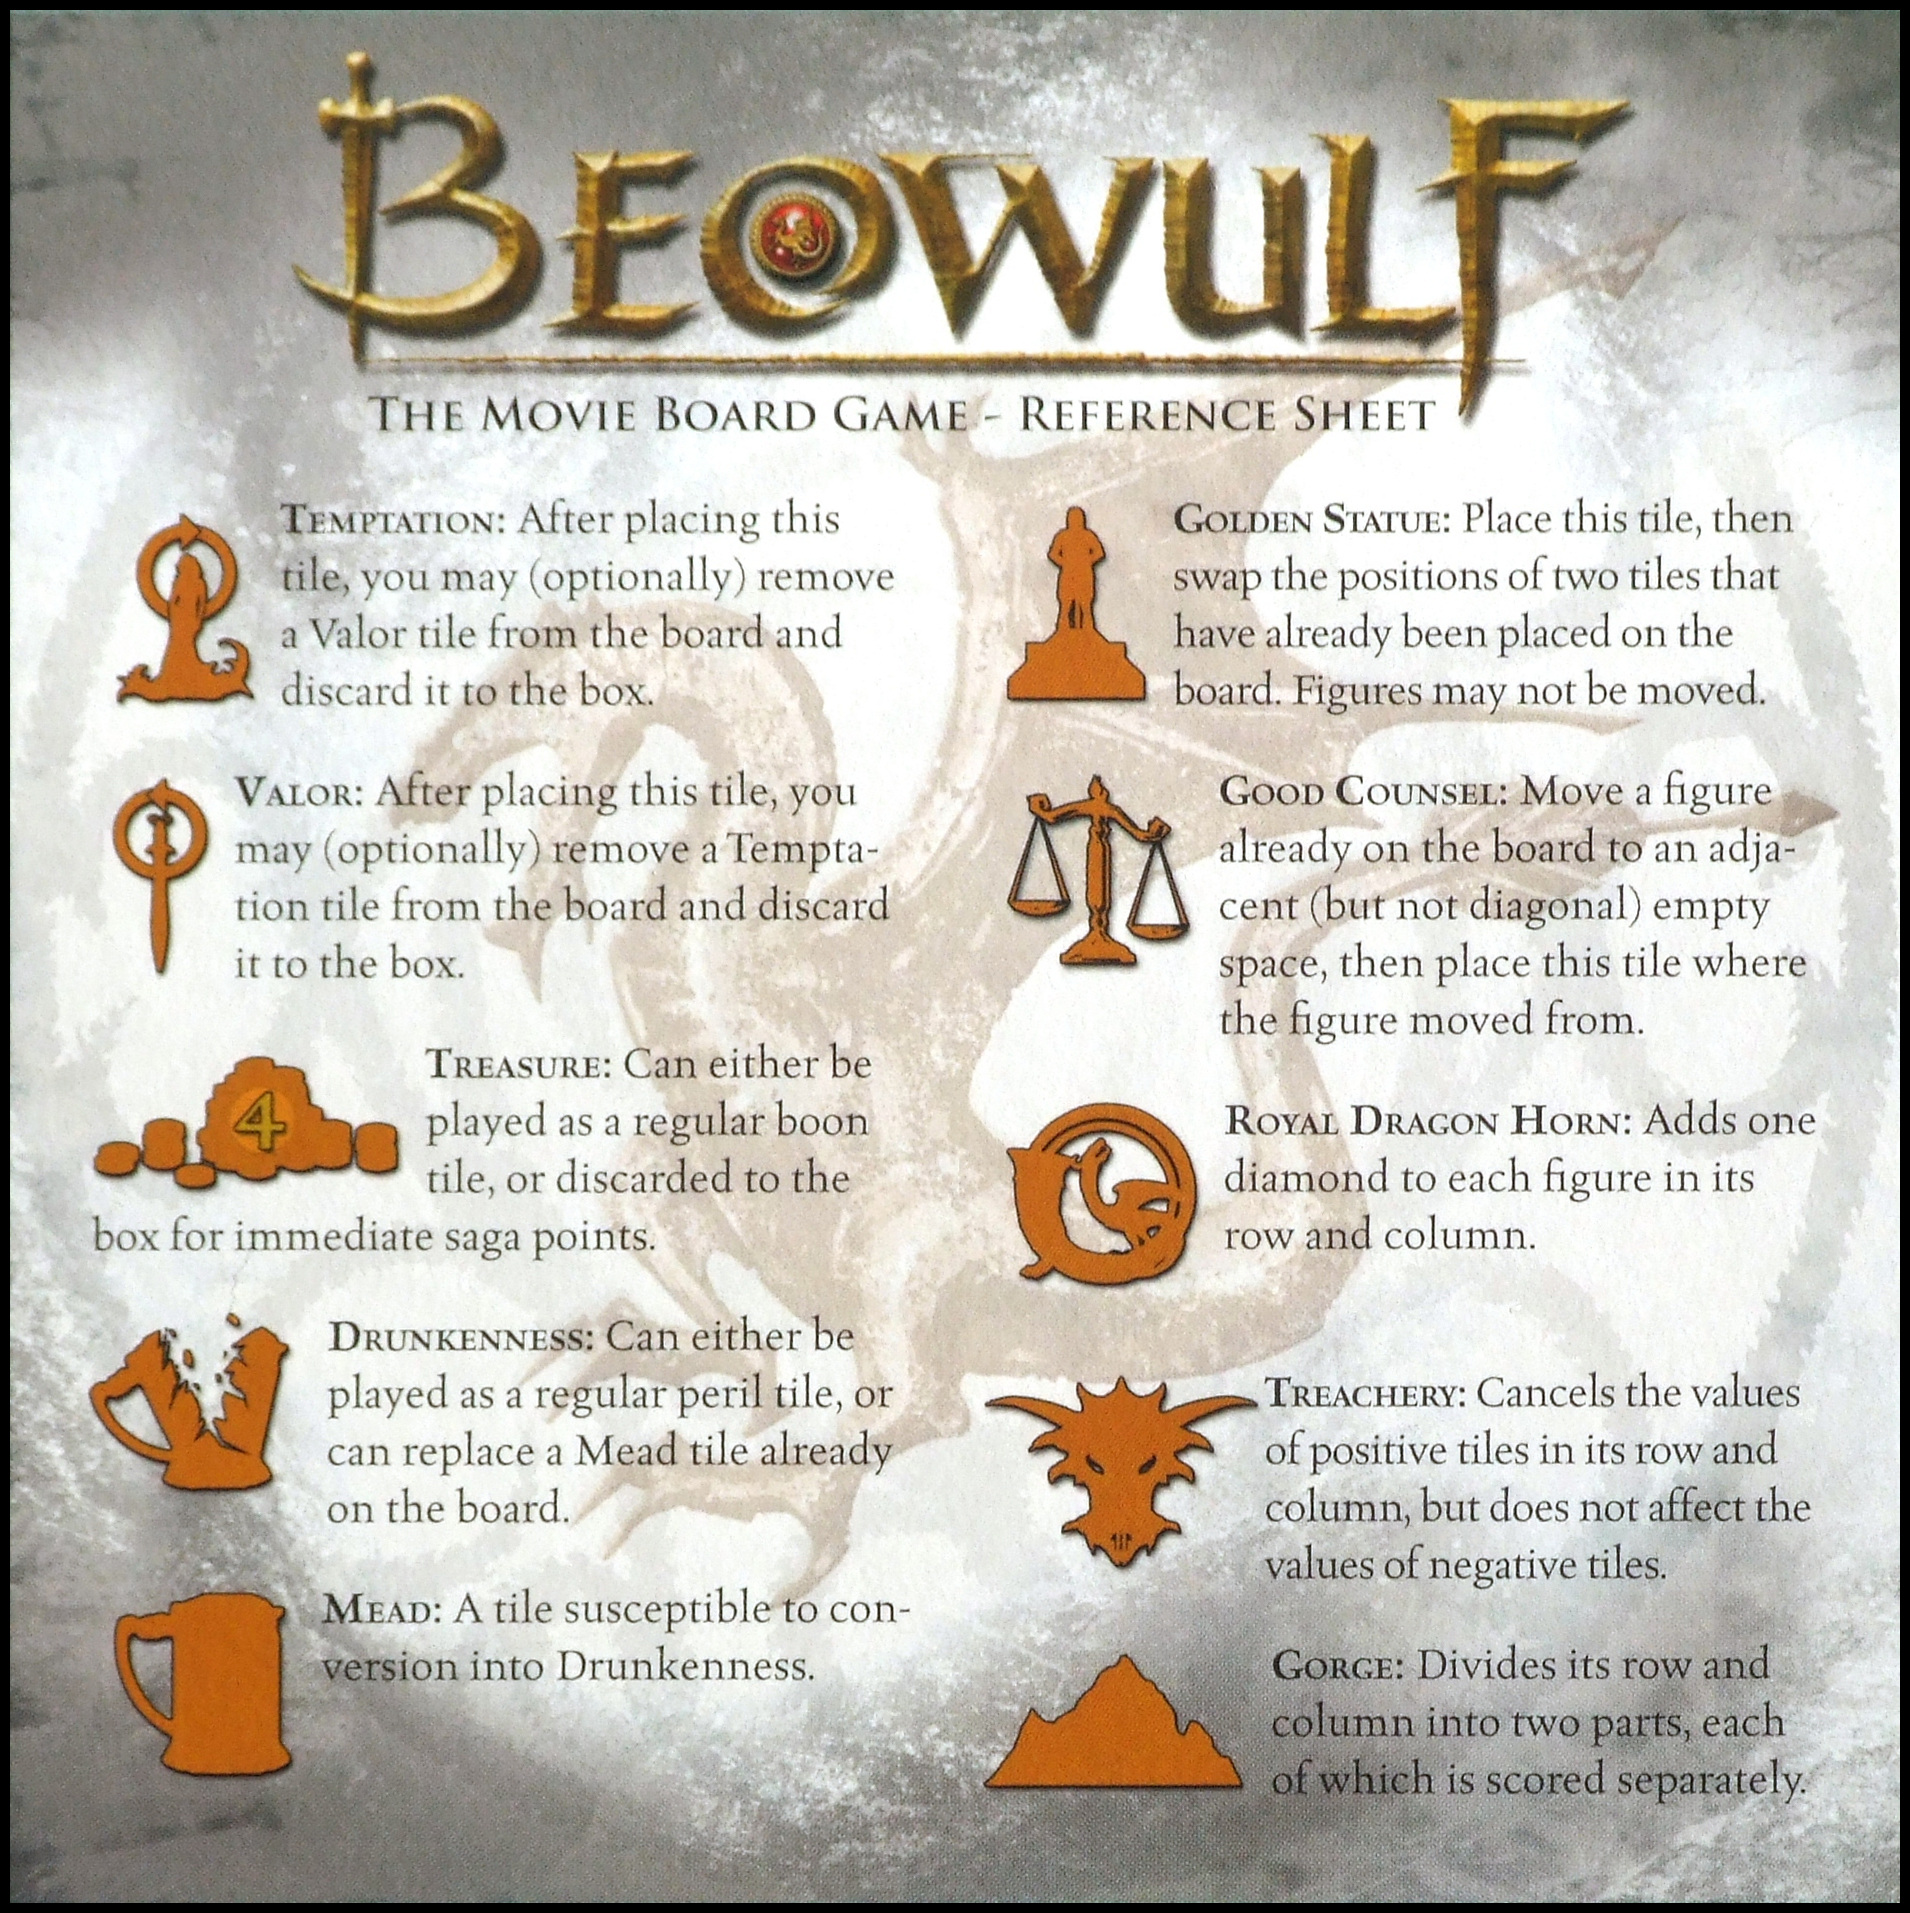 Beowulf: The Movie Board Game - Reference Sheet